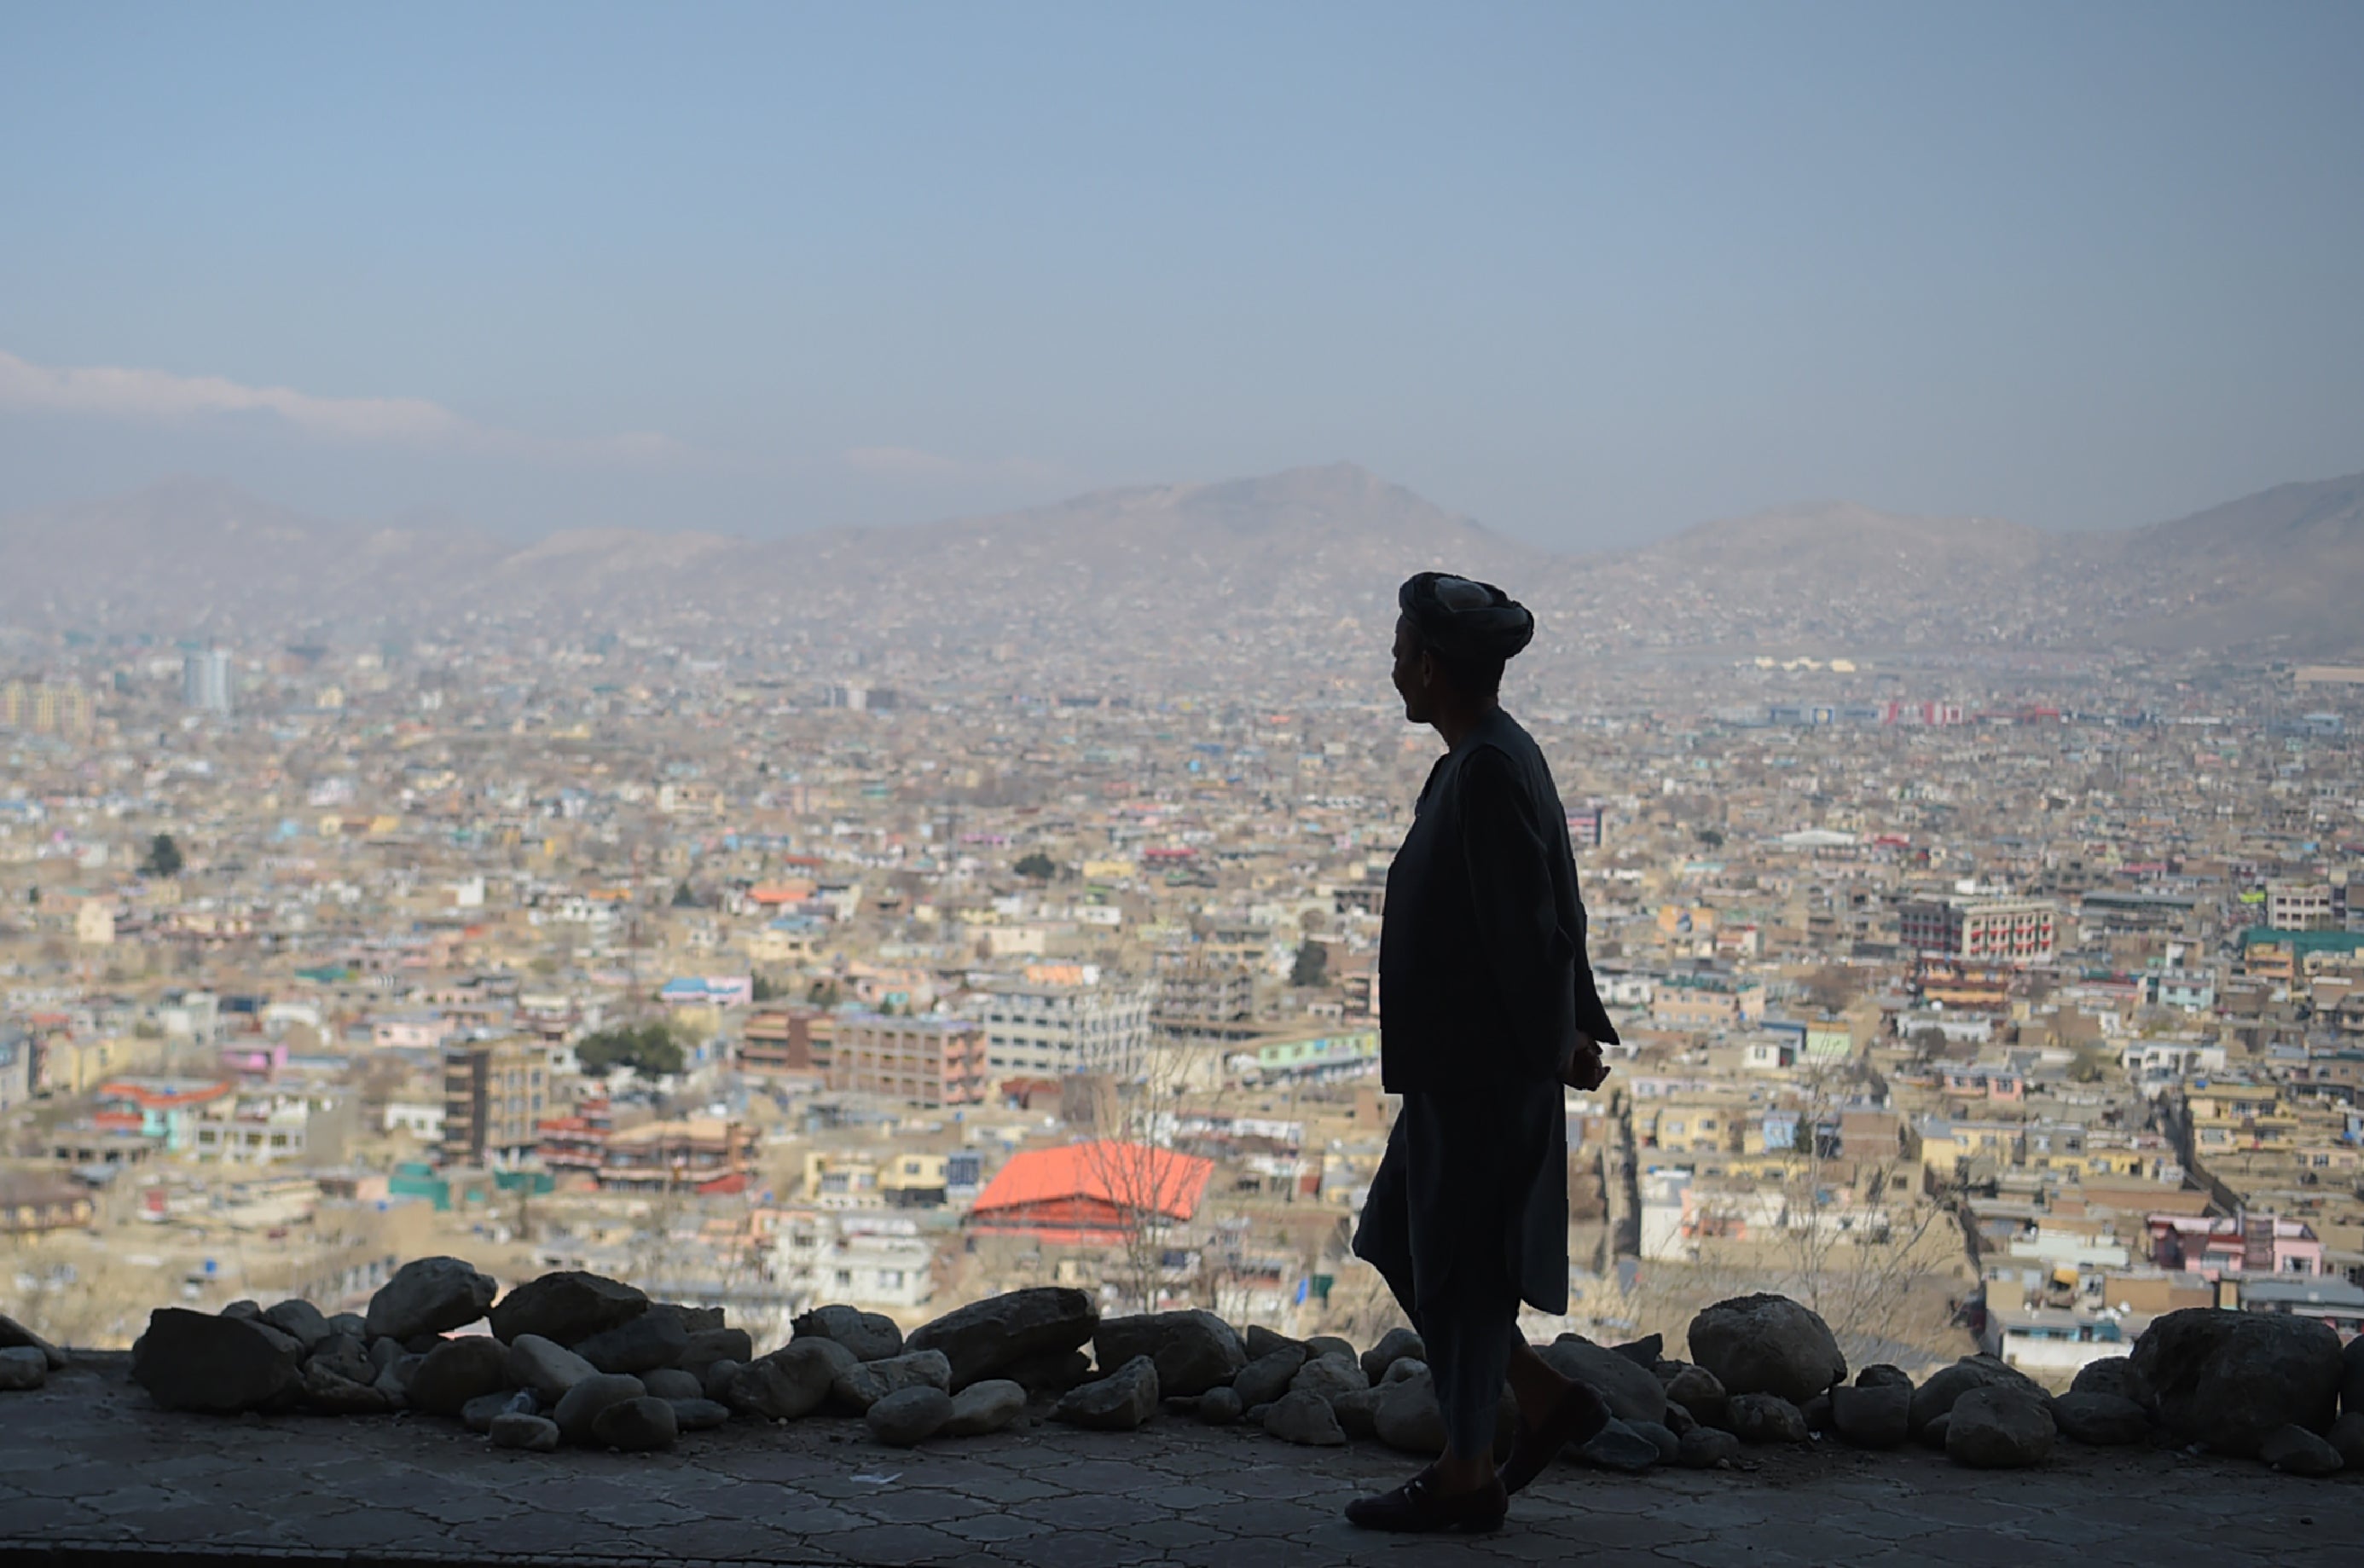 An Afghan man walks during the first day of the Nowruz (Noruz), or Persian New Year, in a hilltop overlooking of Kabul on March 21, 2018.